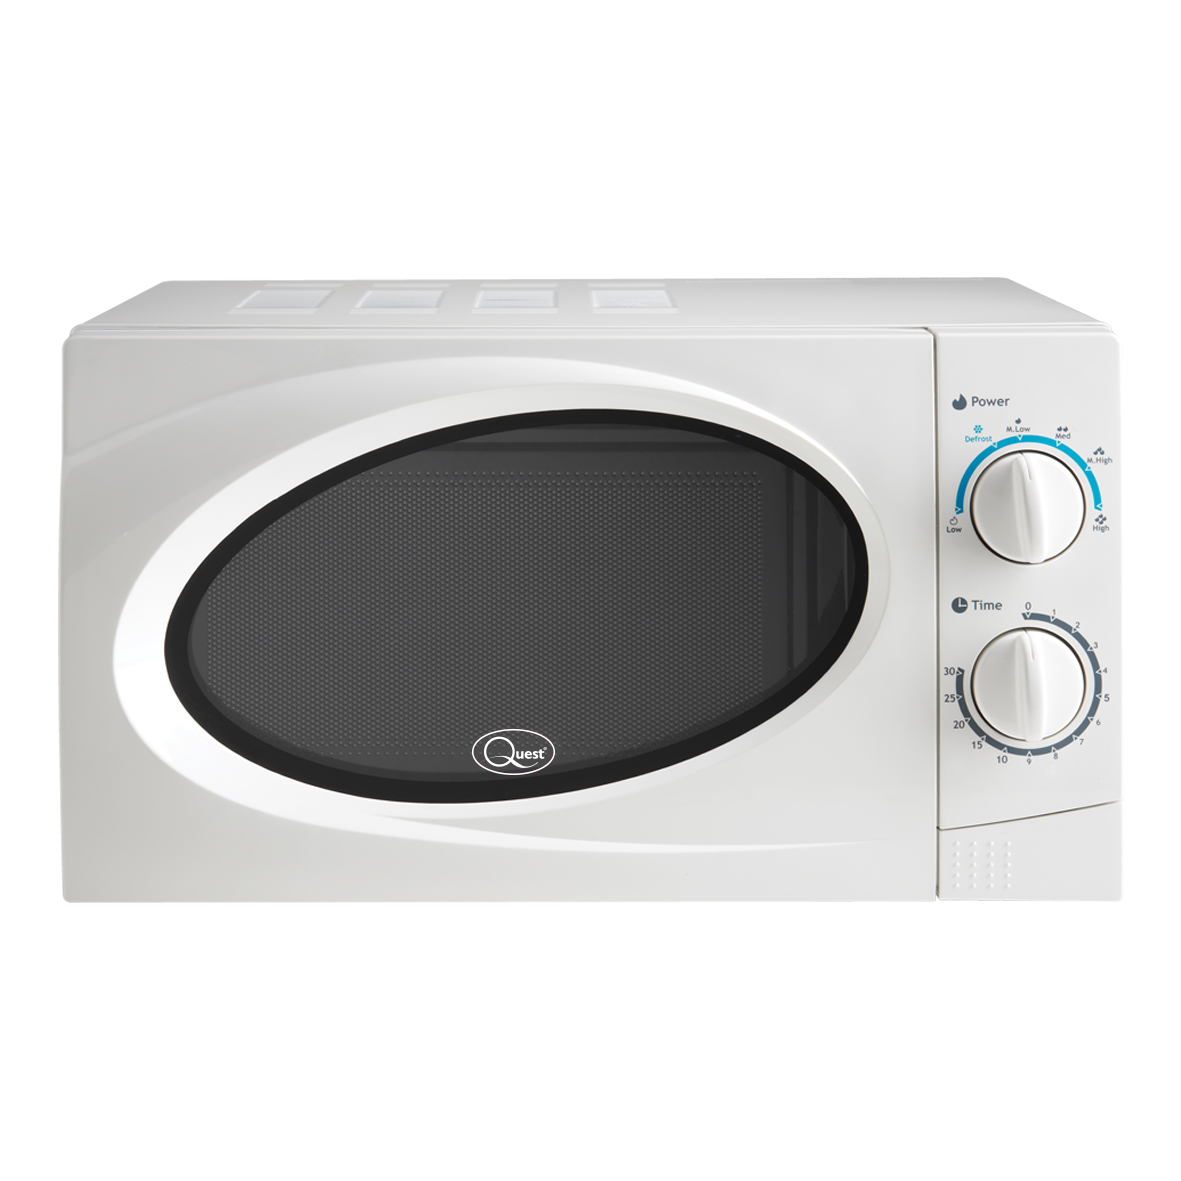 Easy to Operate Quest 35860 Black Classic Dial Microwave H26 x W32 x L46cm 700W Cook Reheat and Defrost Energy Class A 20 Litre Capacity 